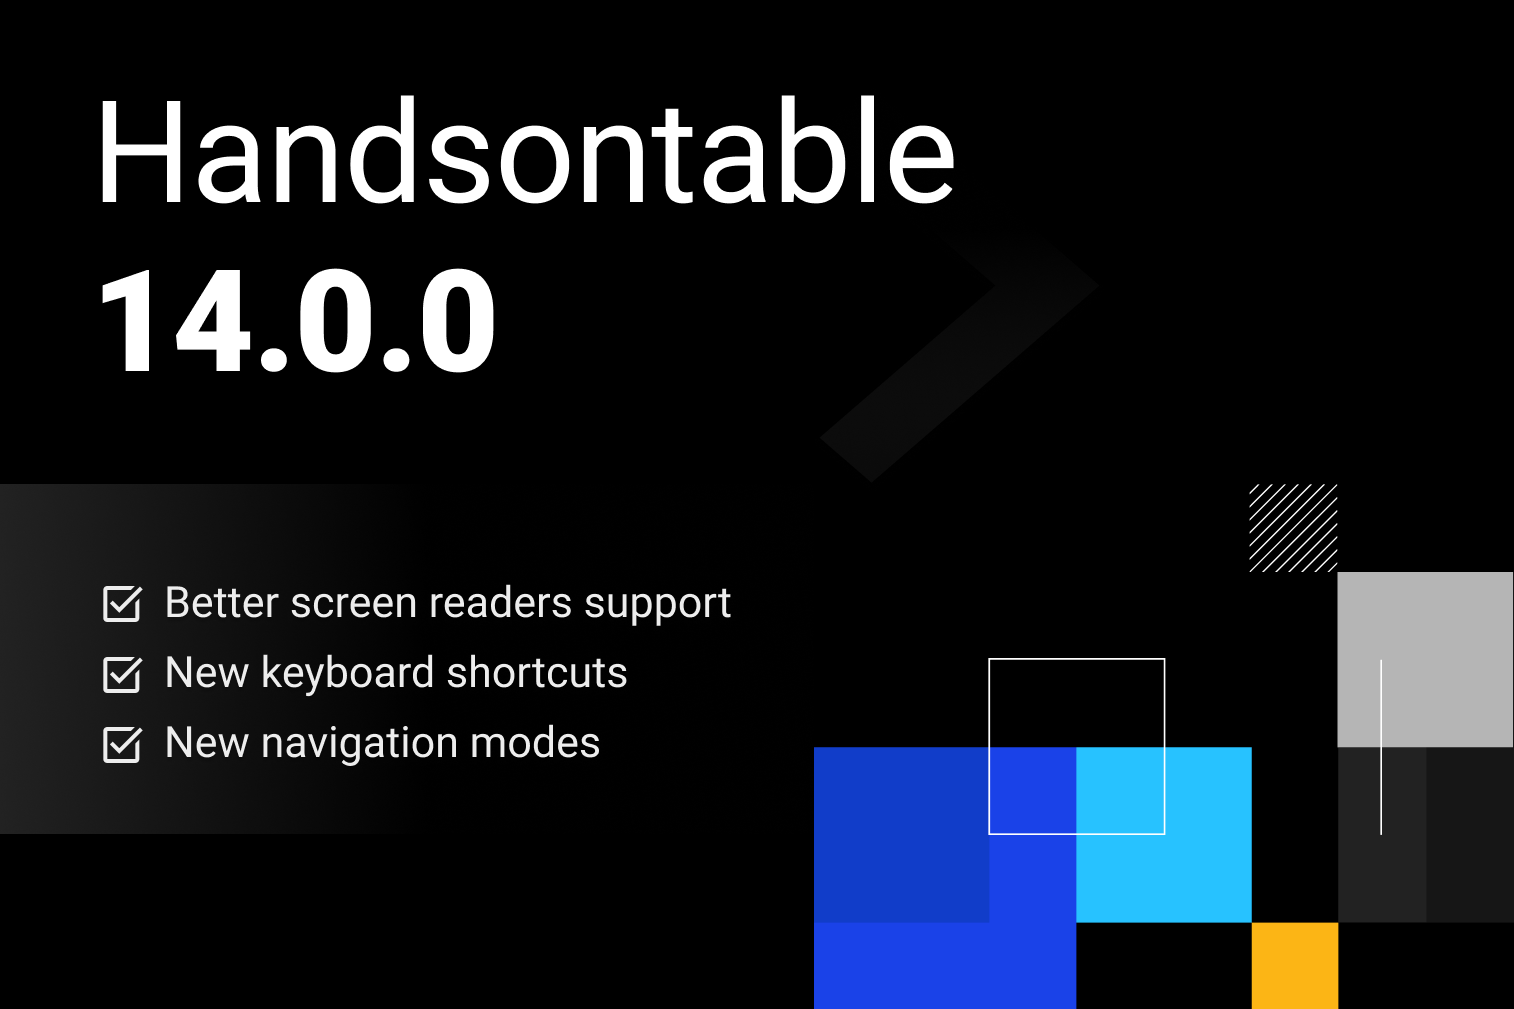 What’s new in Handsontable 14: Improvements to accessibility